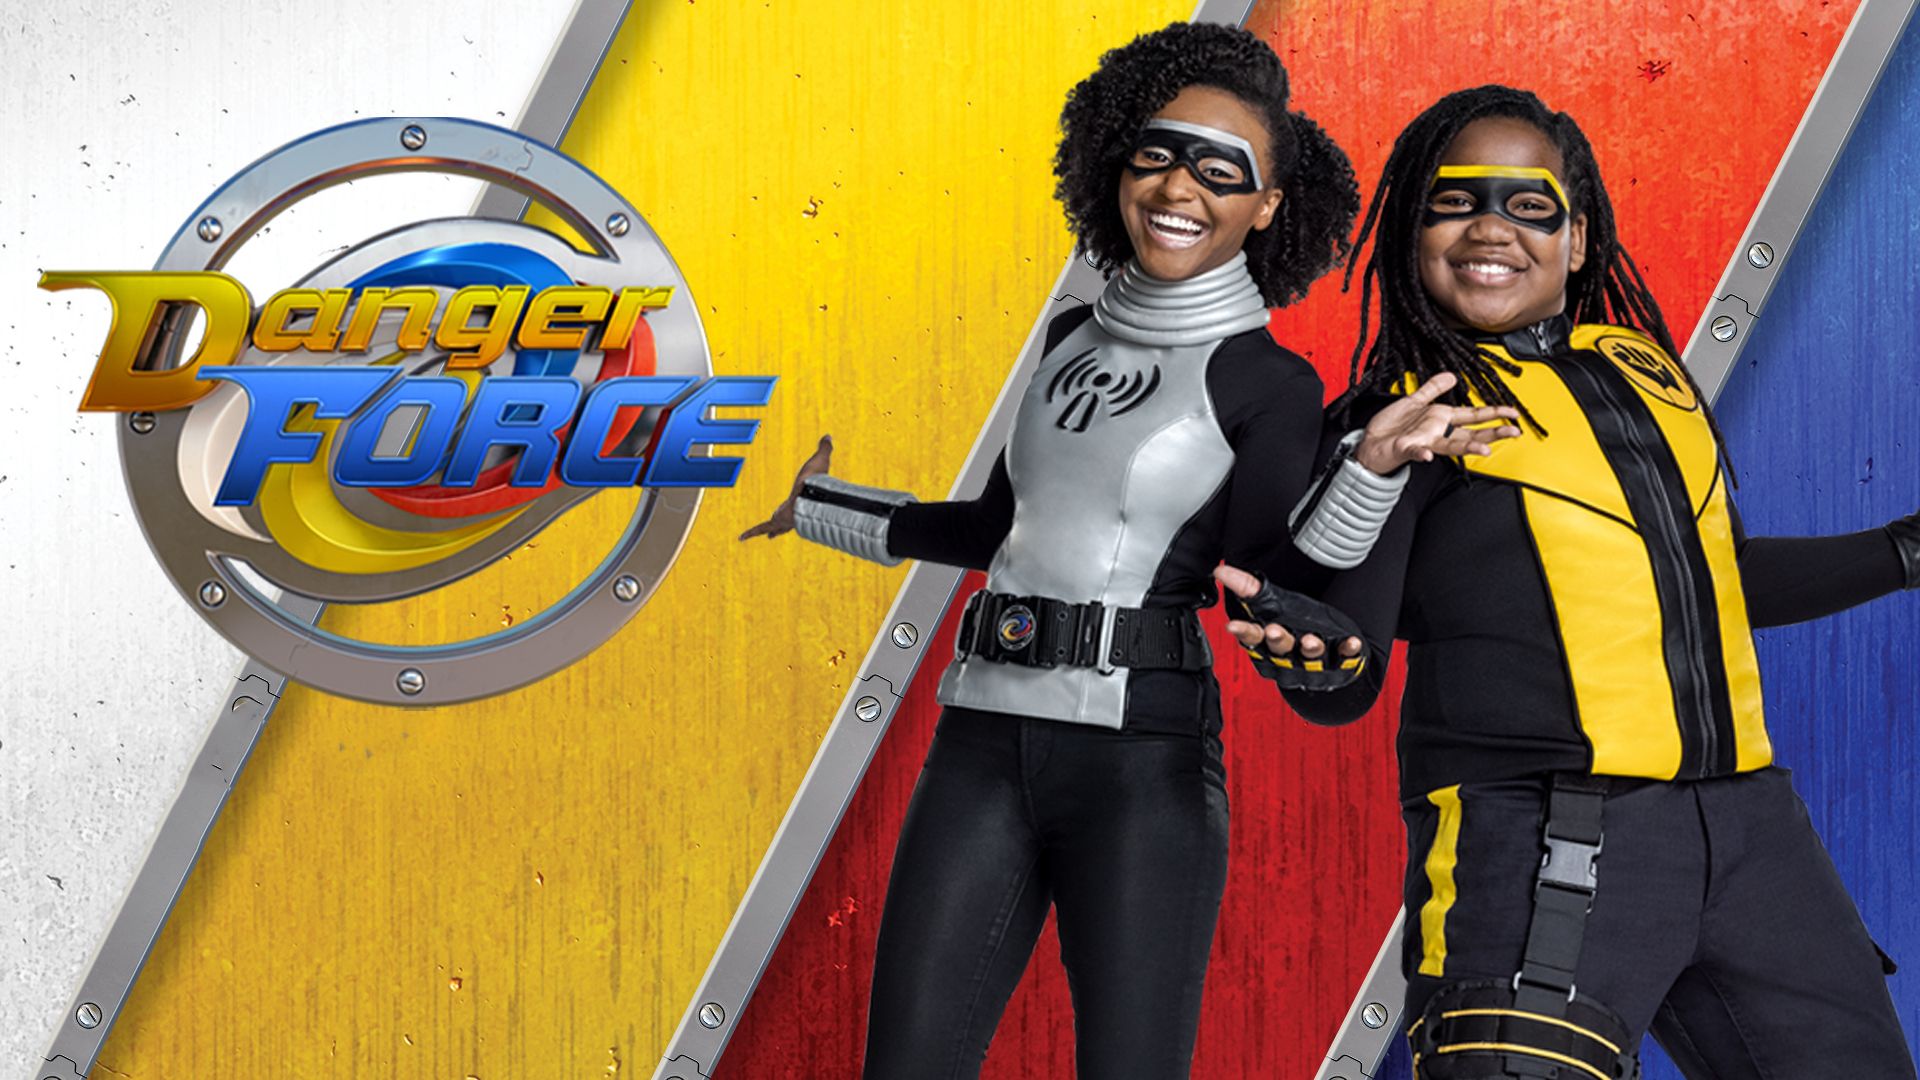 Danger Force Is the New Henry Danger! Force Wallpaper + Everything You Need to Know!